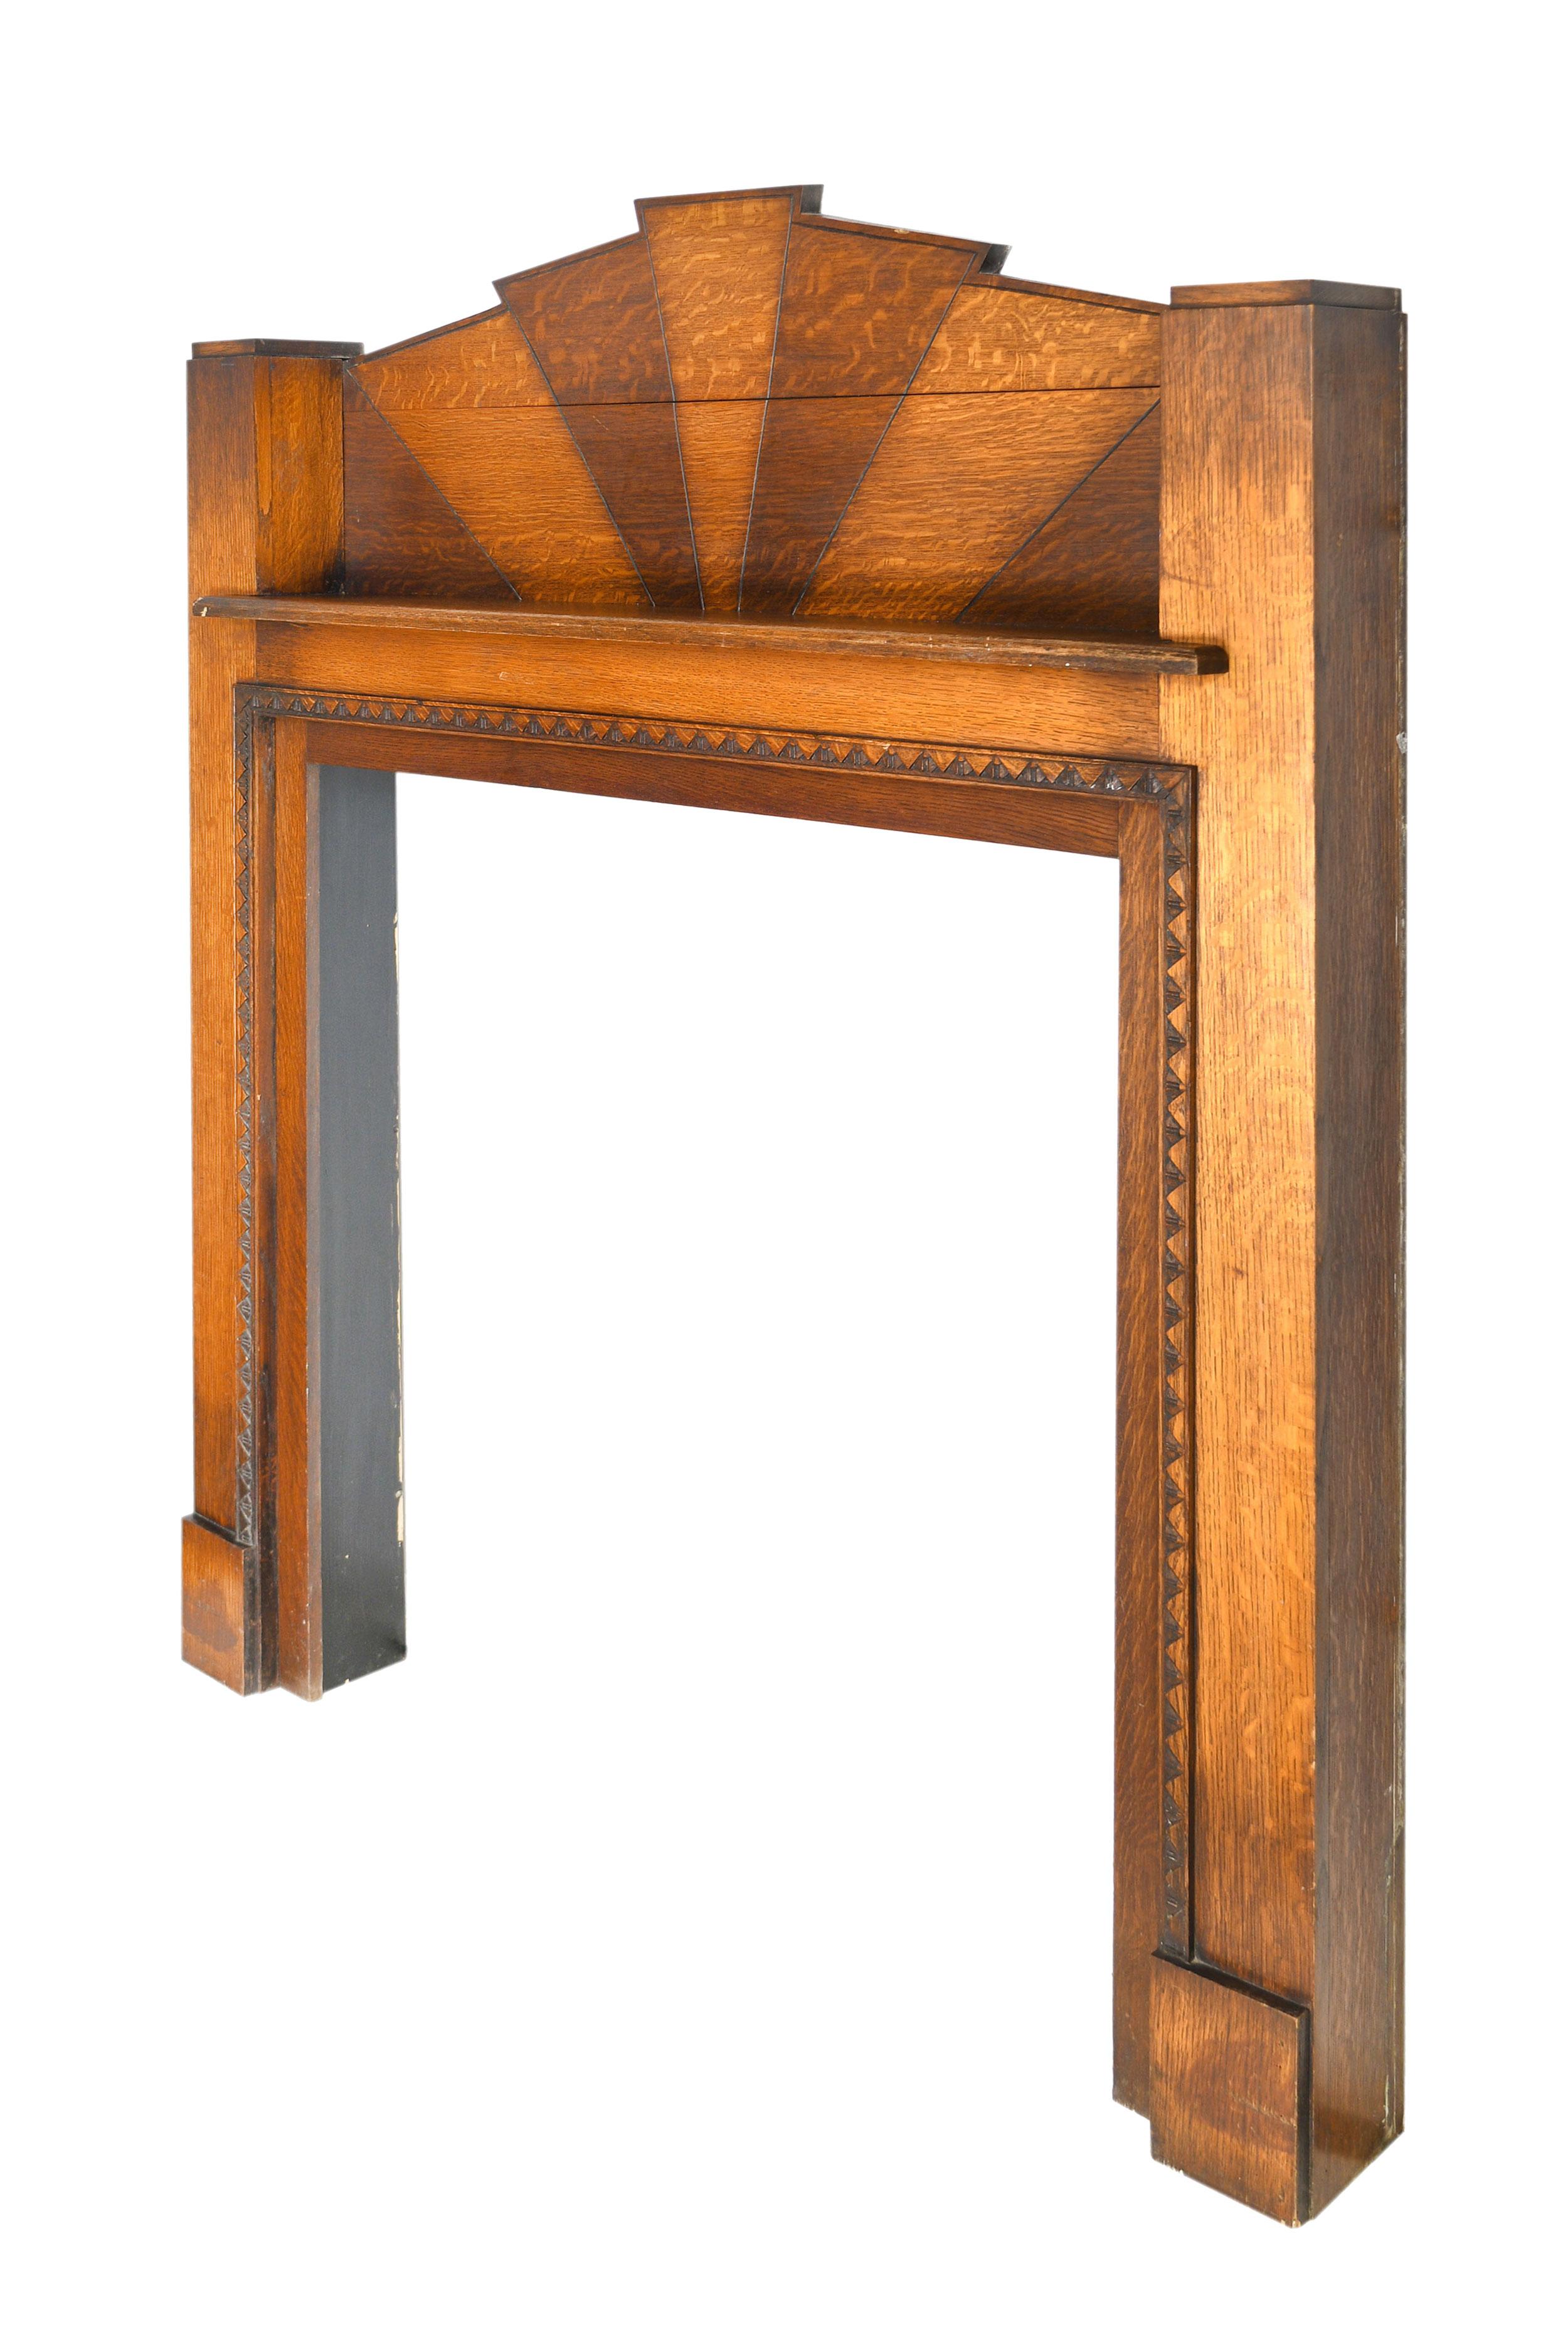 The small stature of this Art Deco mantel doesn’t make it any less of a show-stopper. The sun burst design coming out from the top shows the texture in the grain of the two tones of wood. Your eyes can’t help but move about every surface. The simple